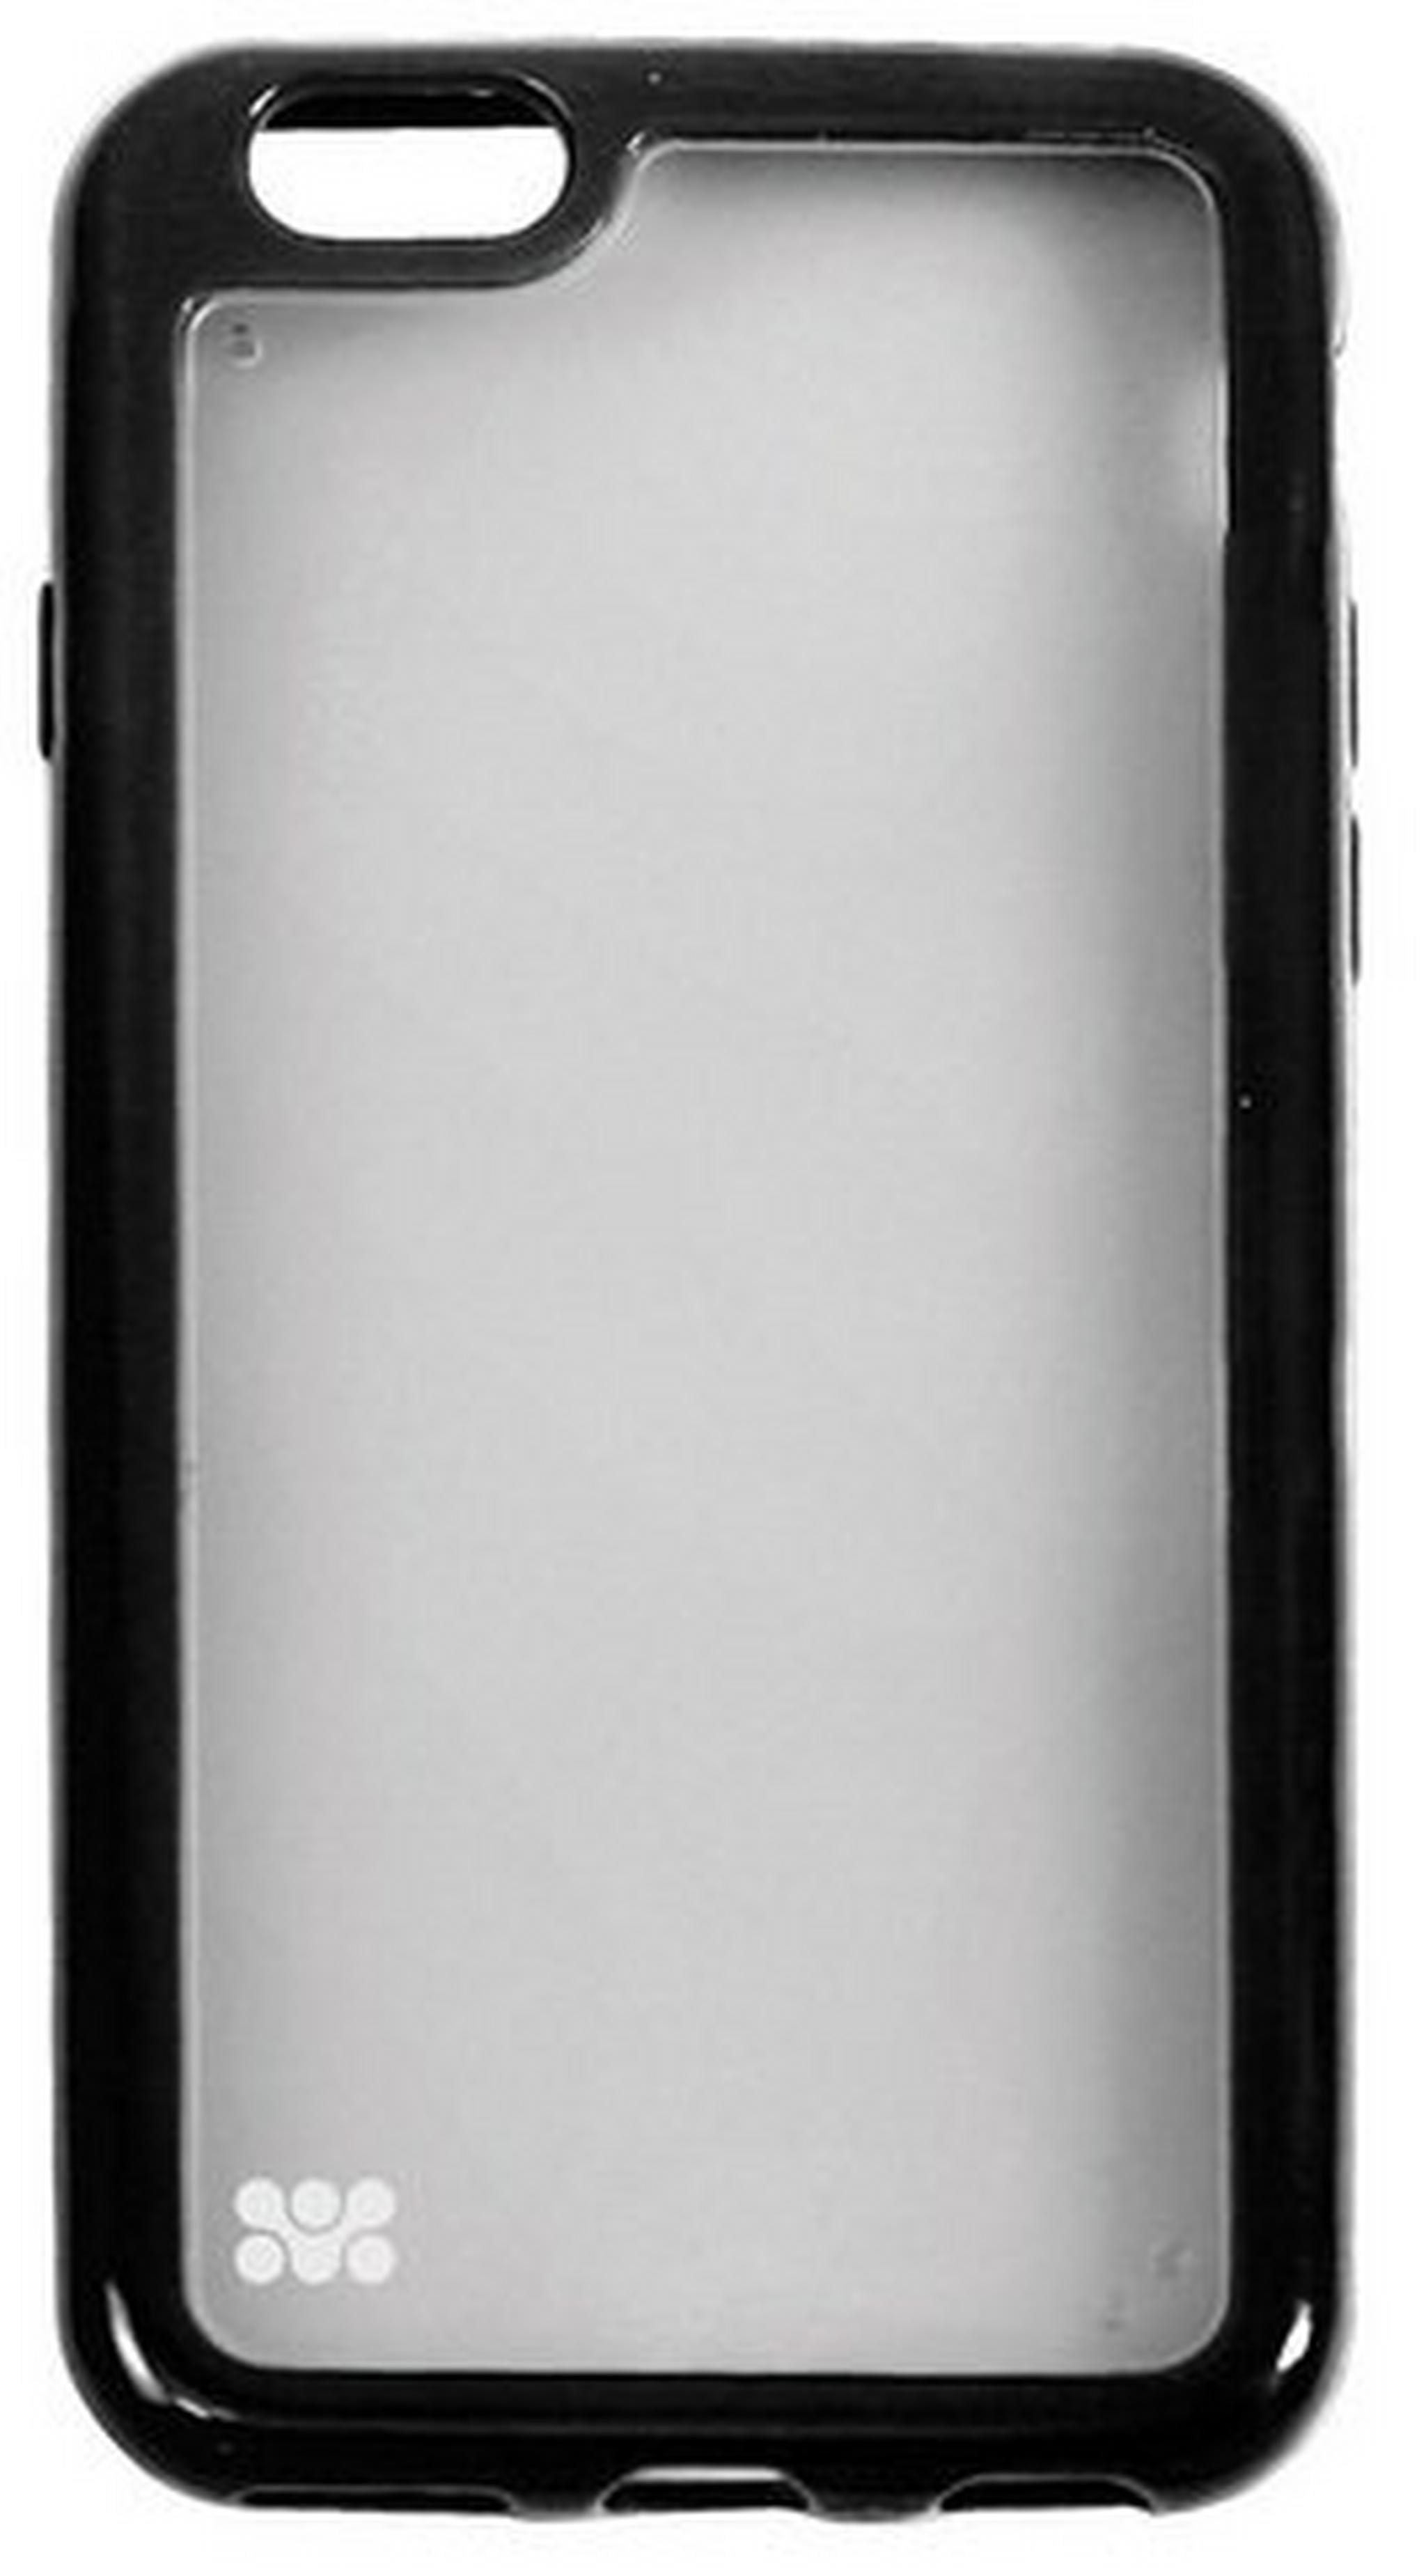 Promate Amos-i6 Impact Resistant Snap-on Cover for iPhone 6 - Black